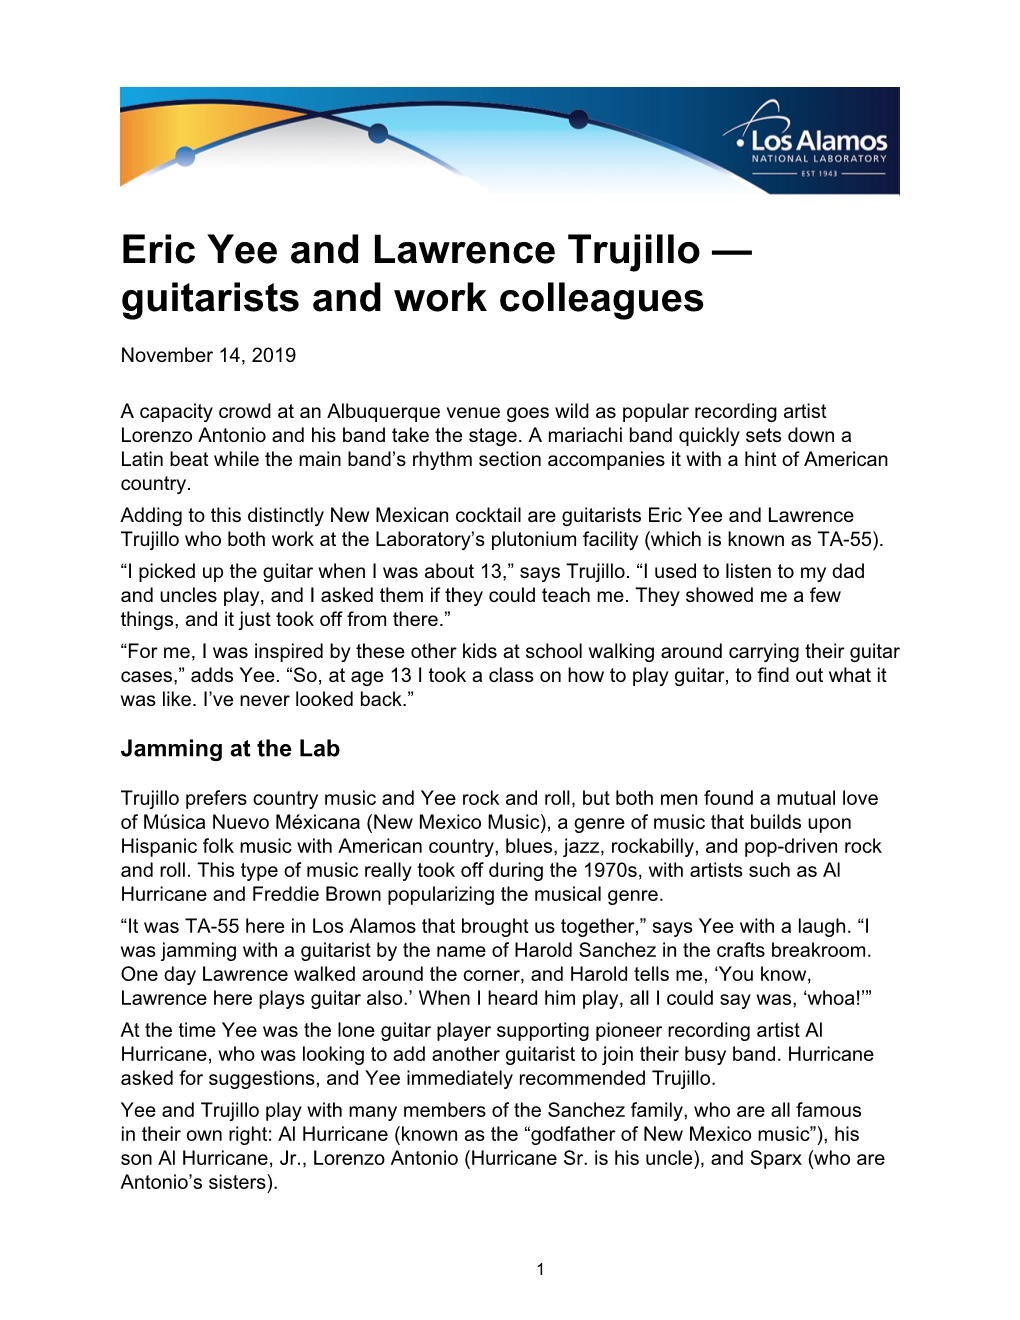 Eric Yee and Lawrence Trujillo — Guitarists and Work Colleagues